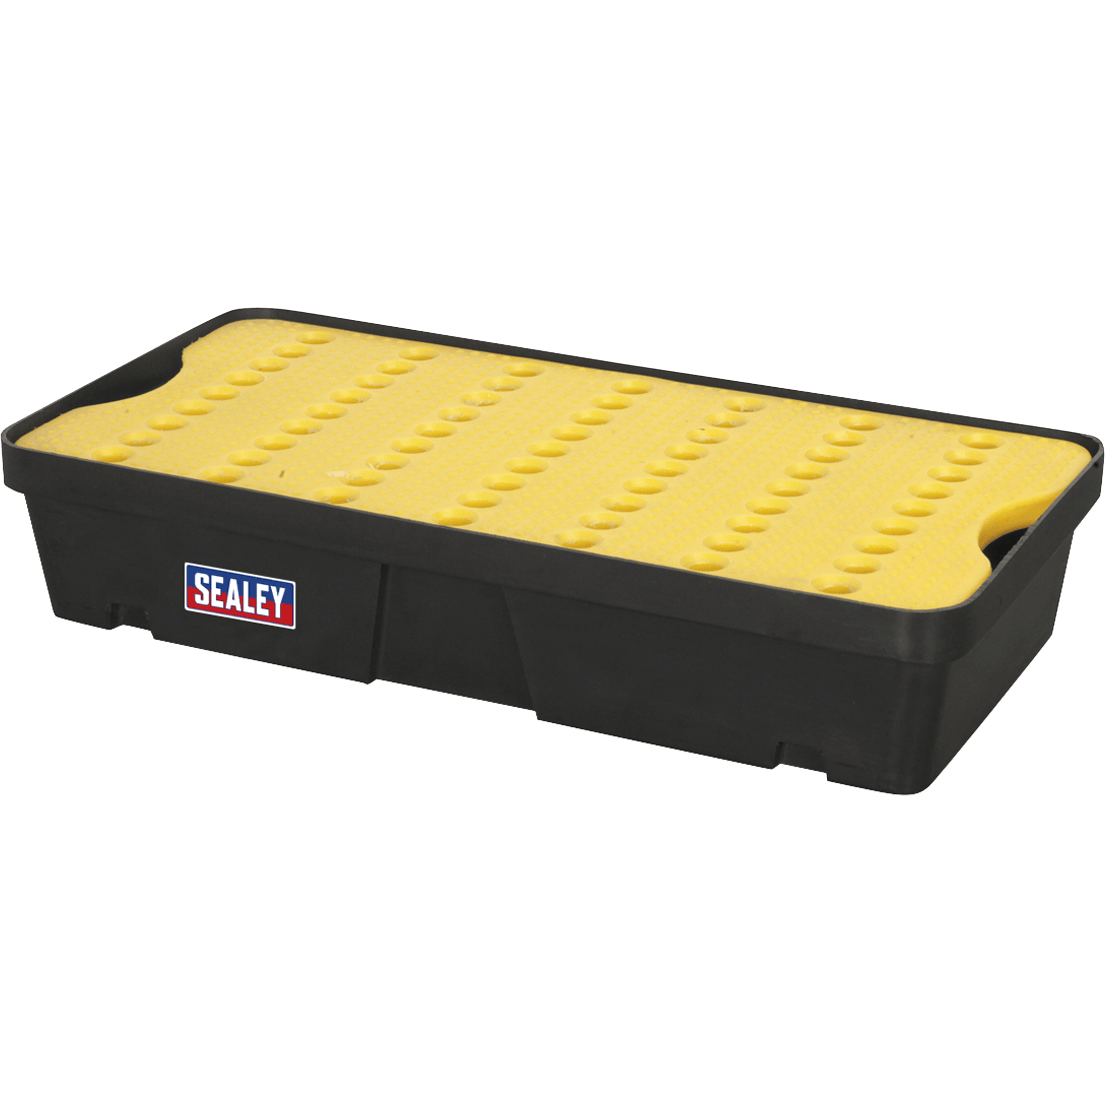 Sealey Drum Spill Tray with Platform 30l